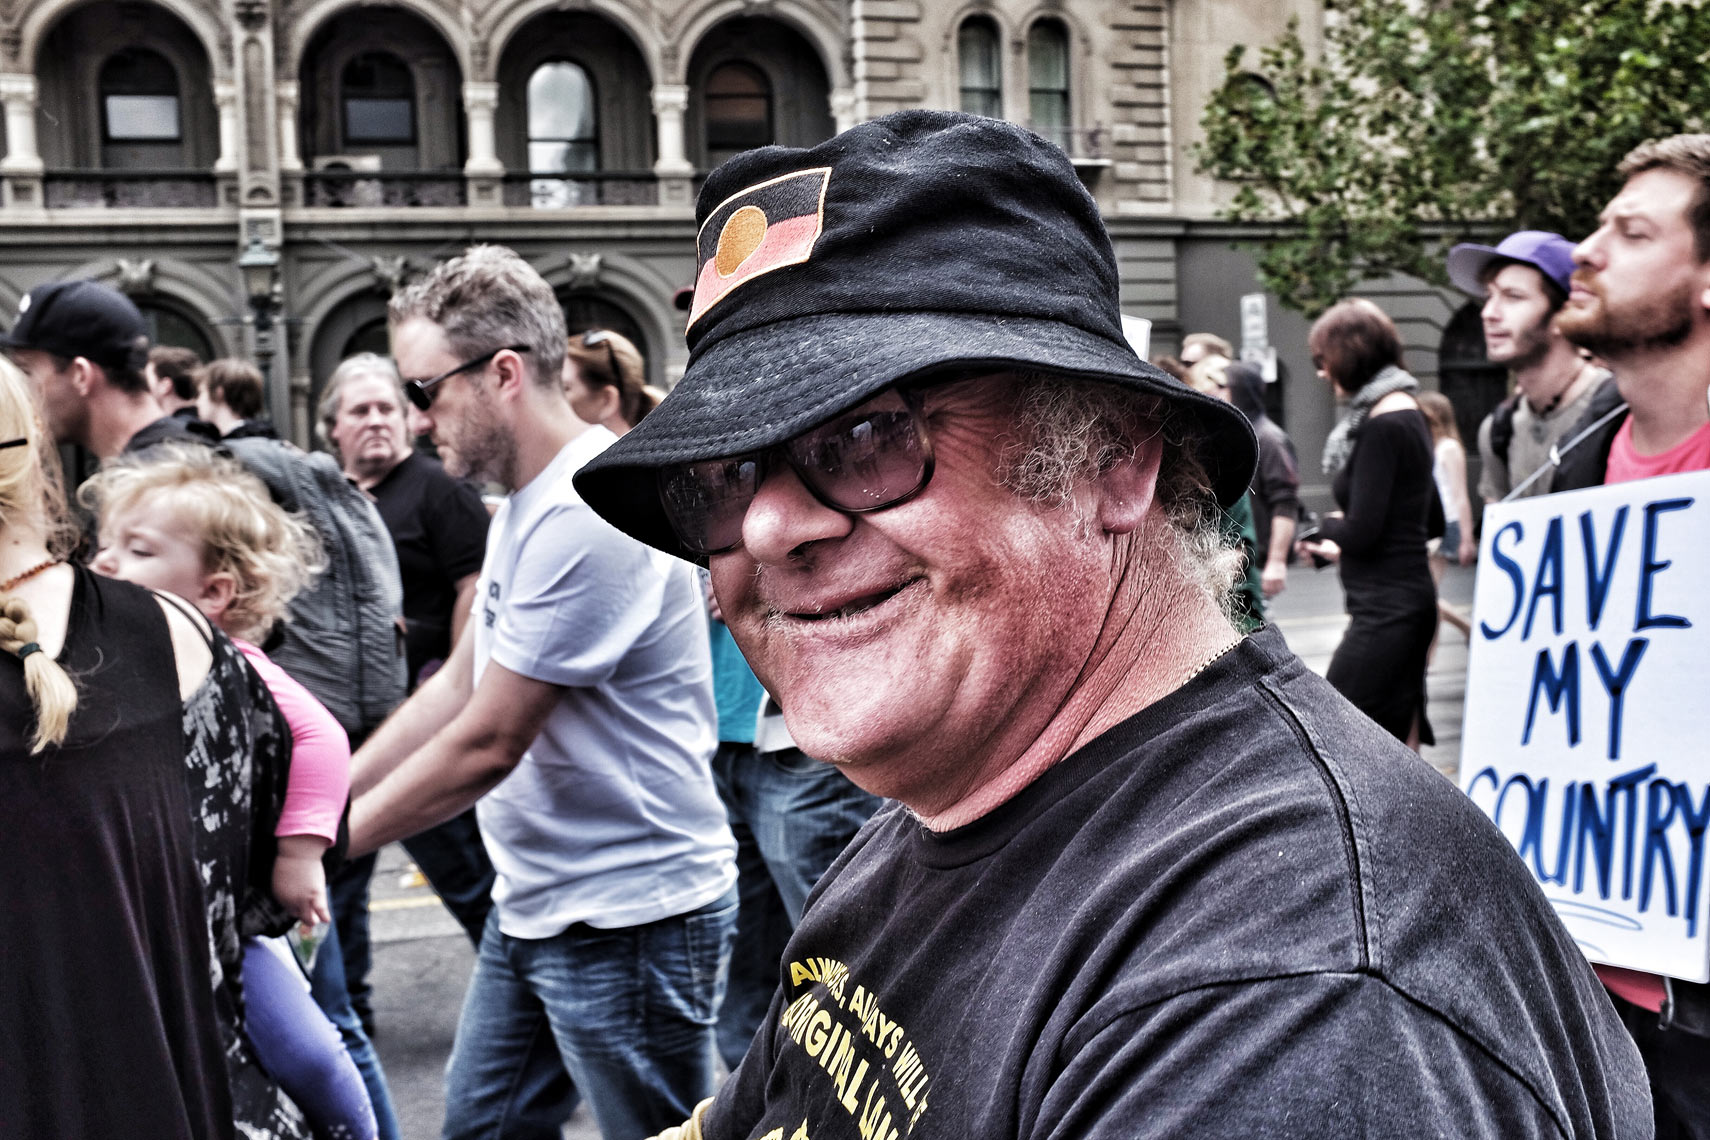 IMG_1119 Street portrait photography by Shane Nagle: March in March, Melbourne